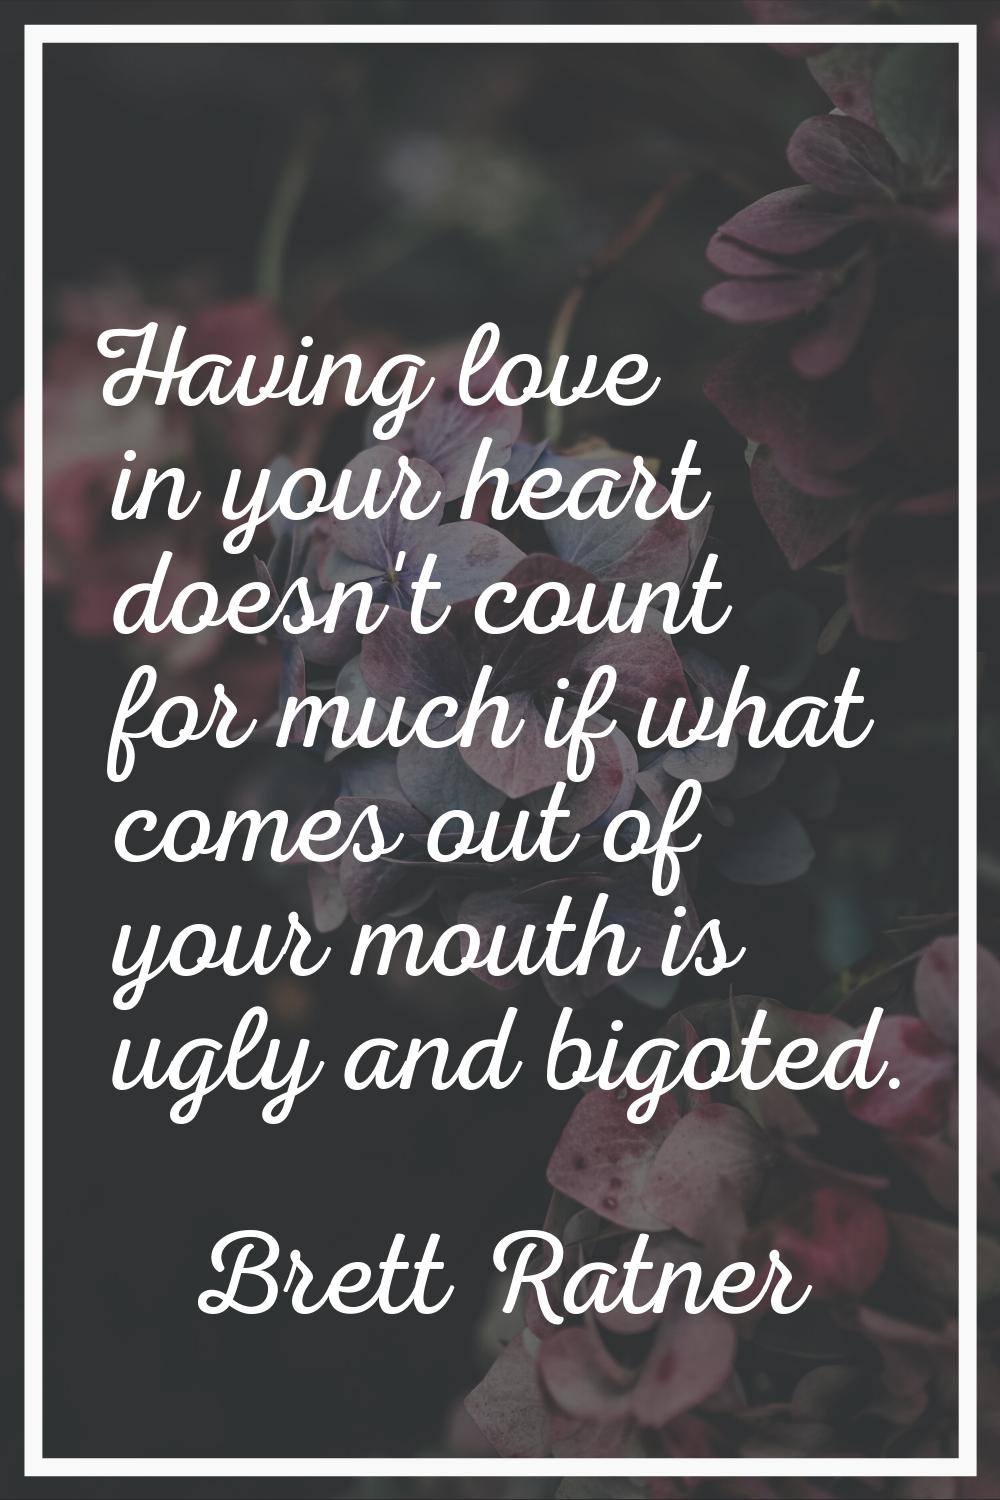 Having love in your heart doesn't count for much if what comes out of your mouth is ugly and bigote